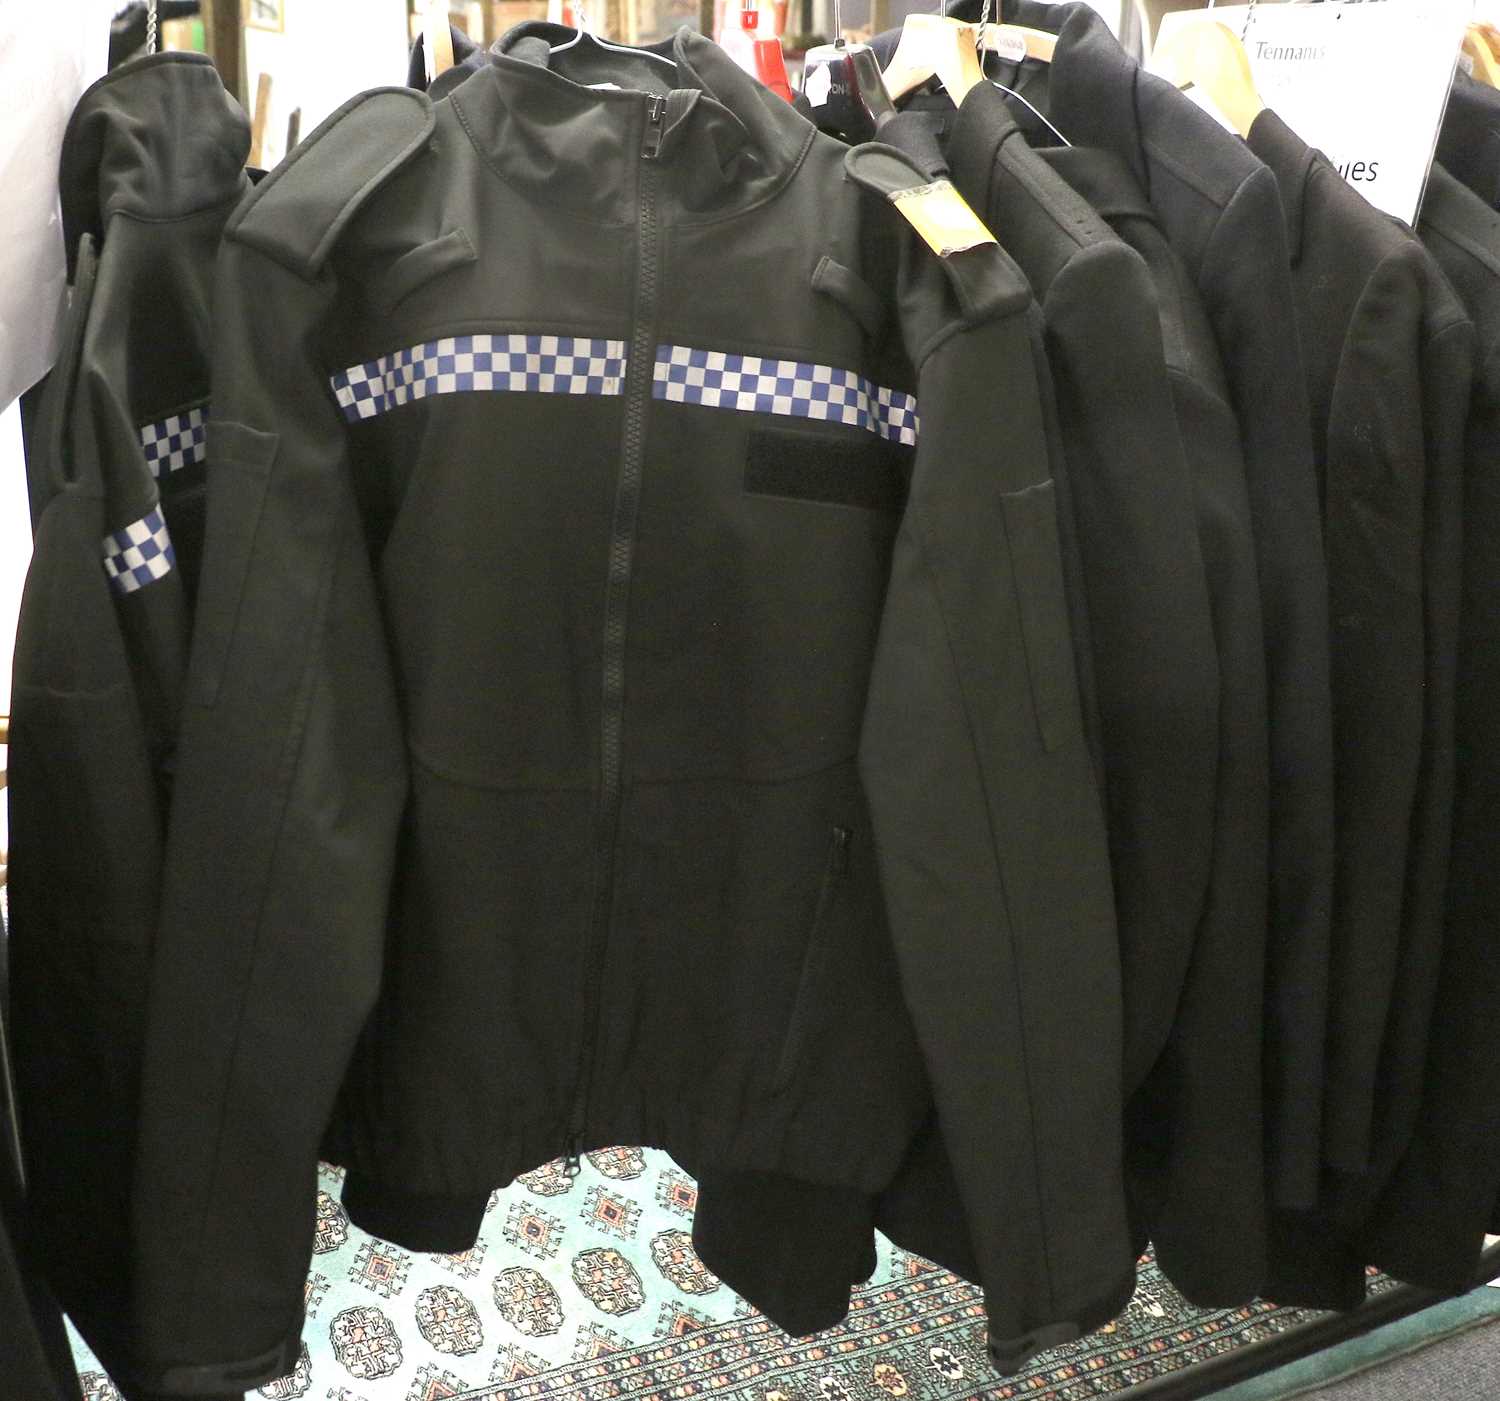 A Quantity of British Female Police Officers Uniforms, comprising eight tunics, two fleeces, - Image 3 of 3